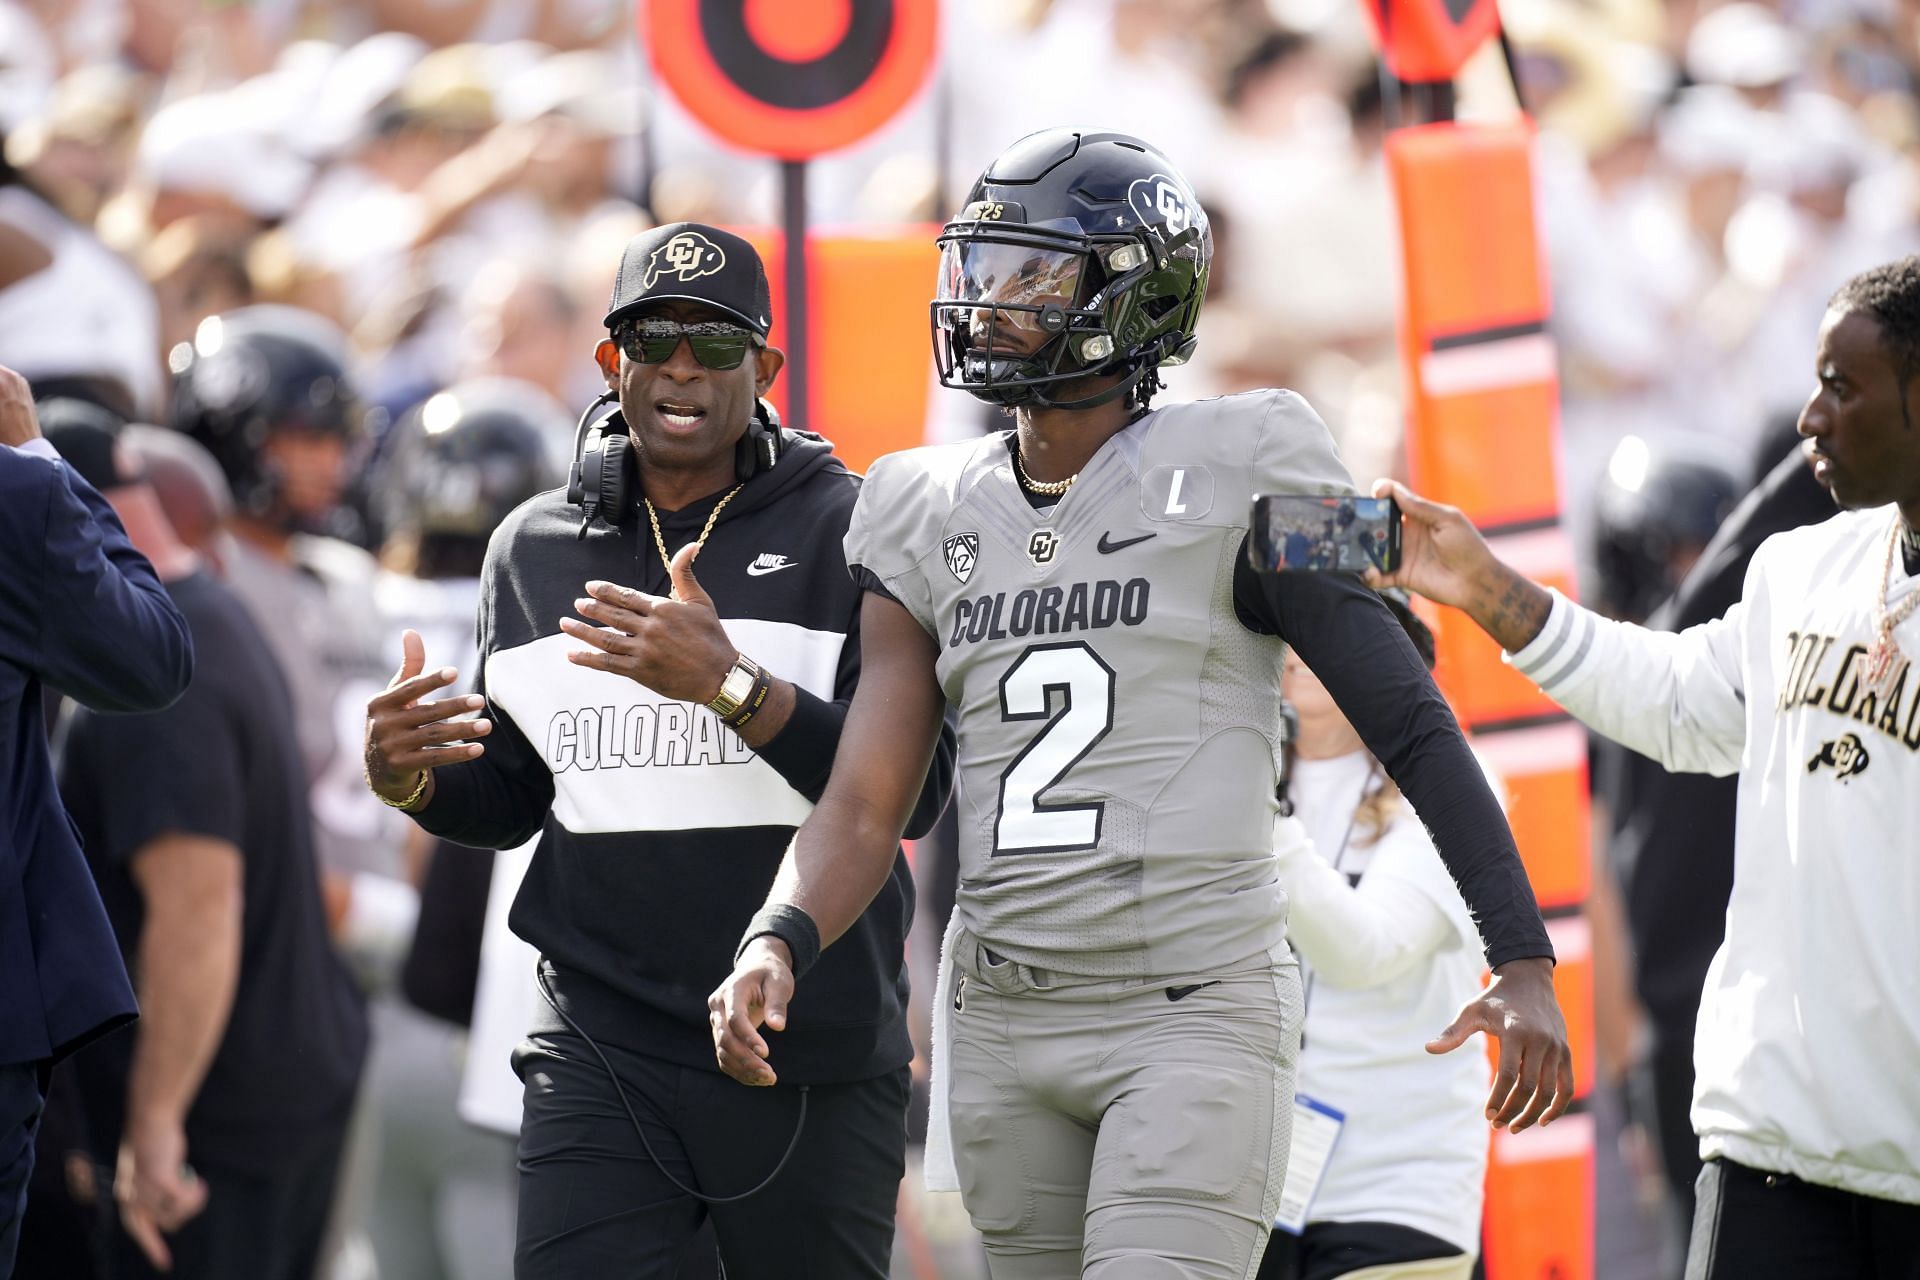 USC Colorado Football: Colorado head coach Deion Sanders, left, talks with his son, quarterback Shedeur Sanders, before the first half of an NCAA college football game against Southern California, Saturday, Sept. 30, 2023, in Boulder, Colo. (AP Photo/David Zalubowski)